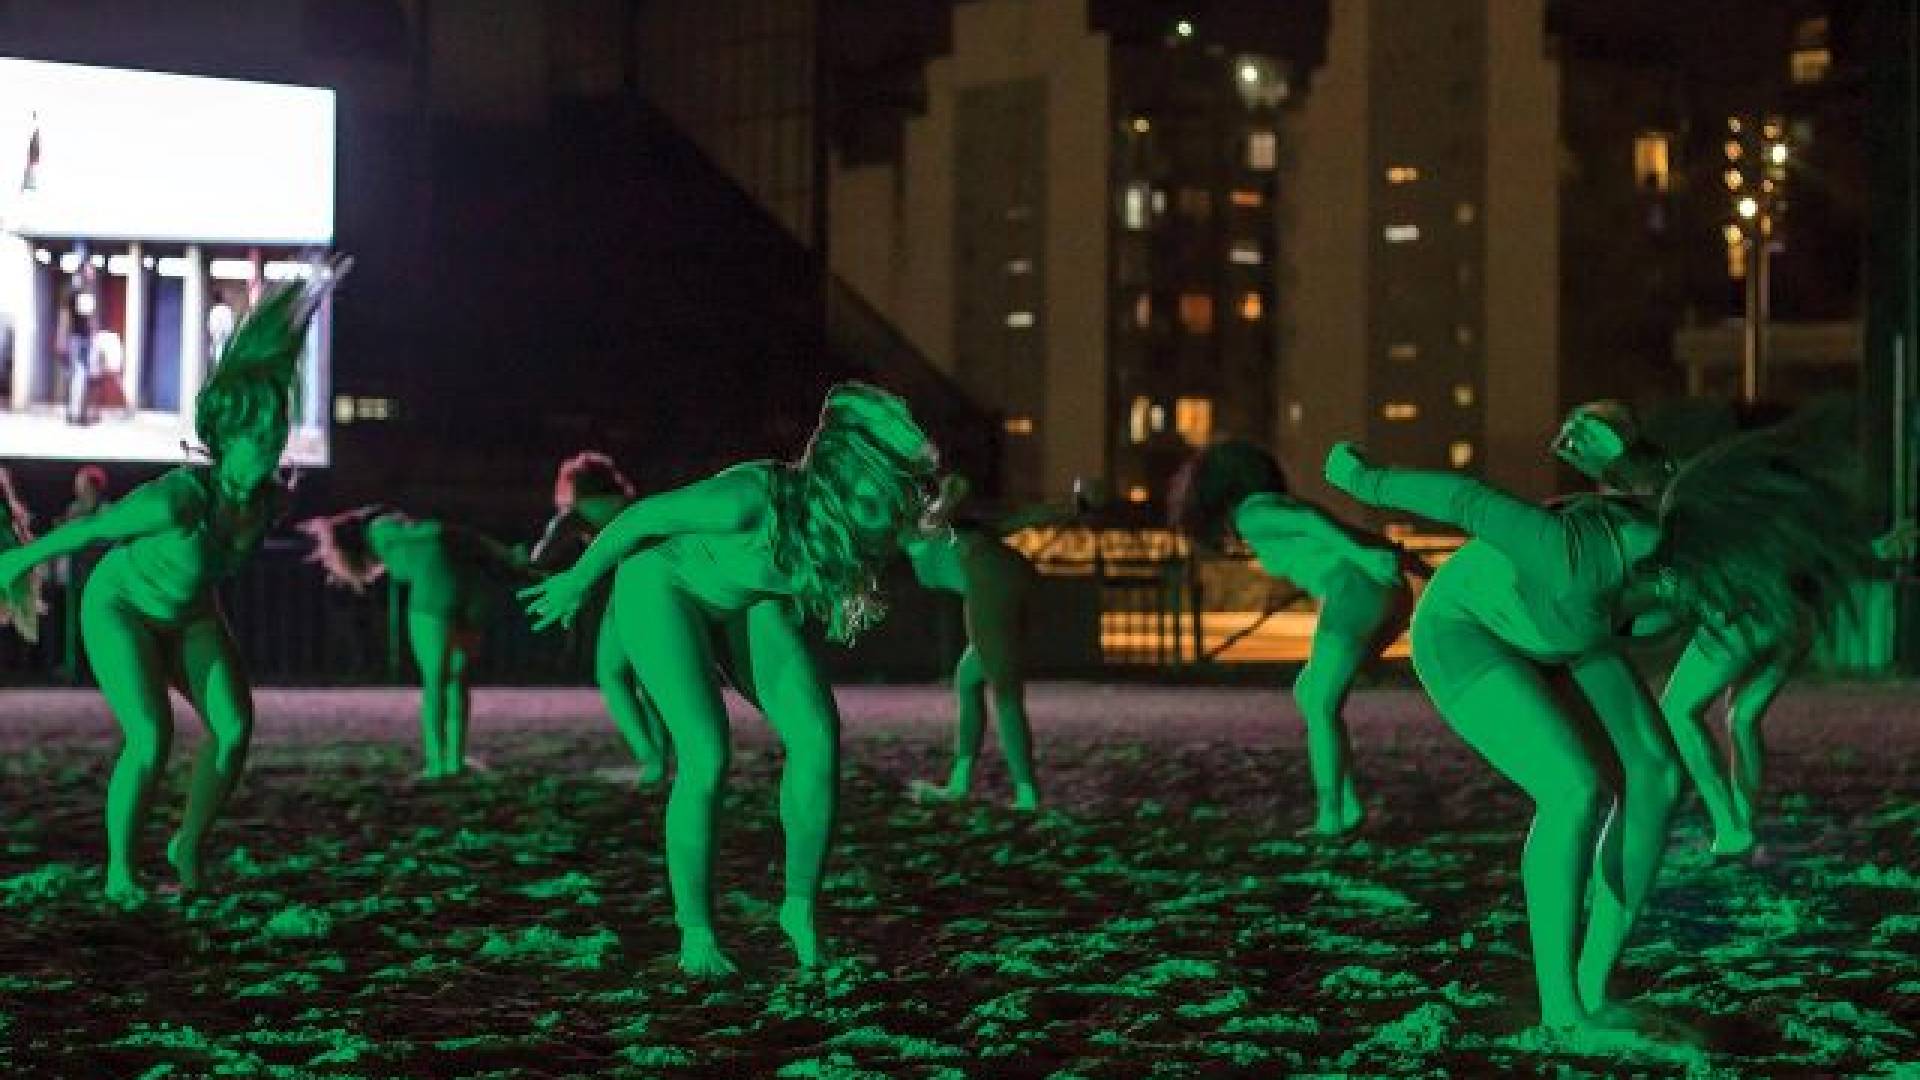 group of performers glow green as they're bent over mid-performance